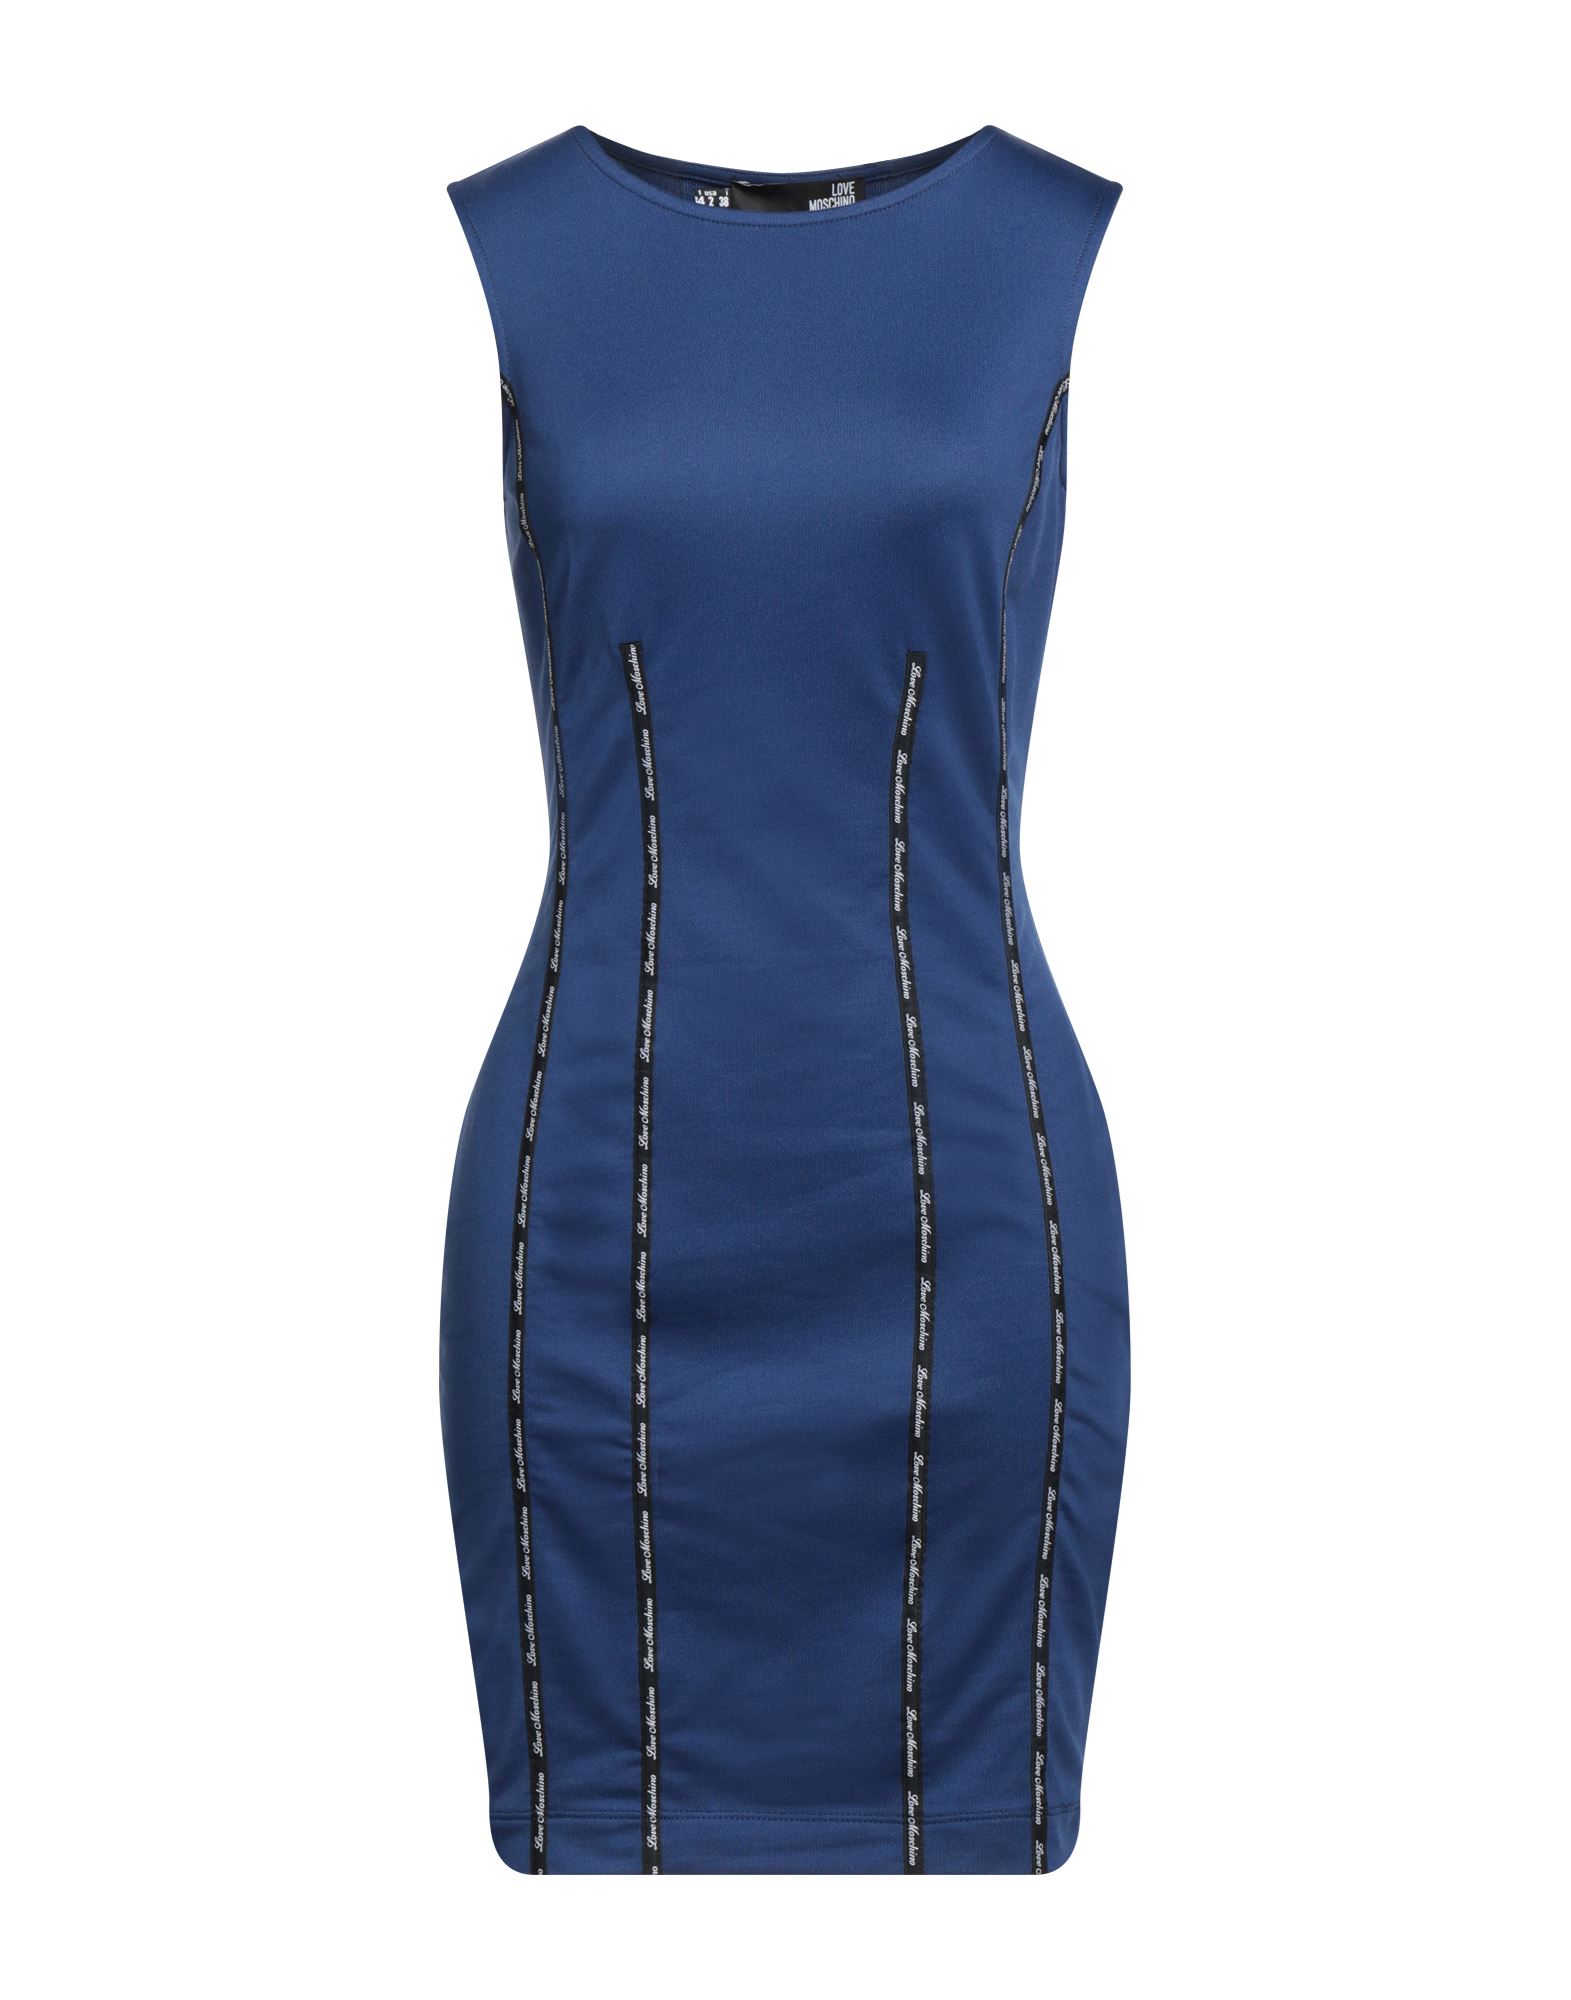 Love Moschino Short Dresses In Blue